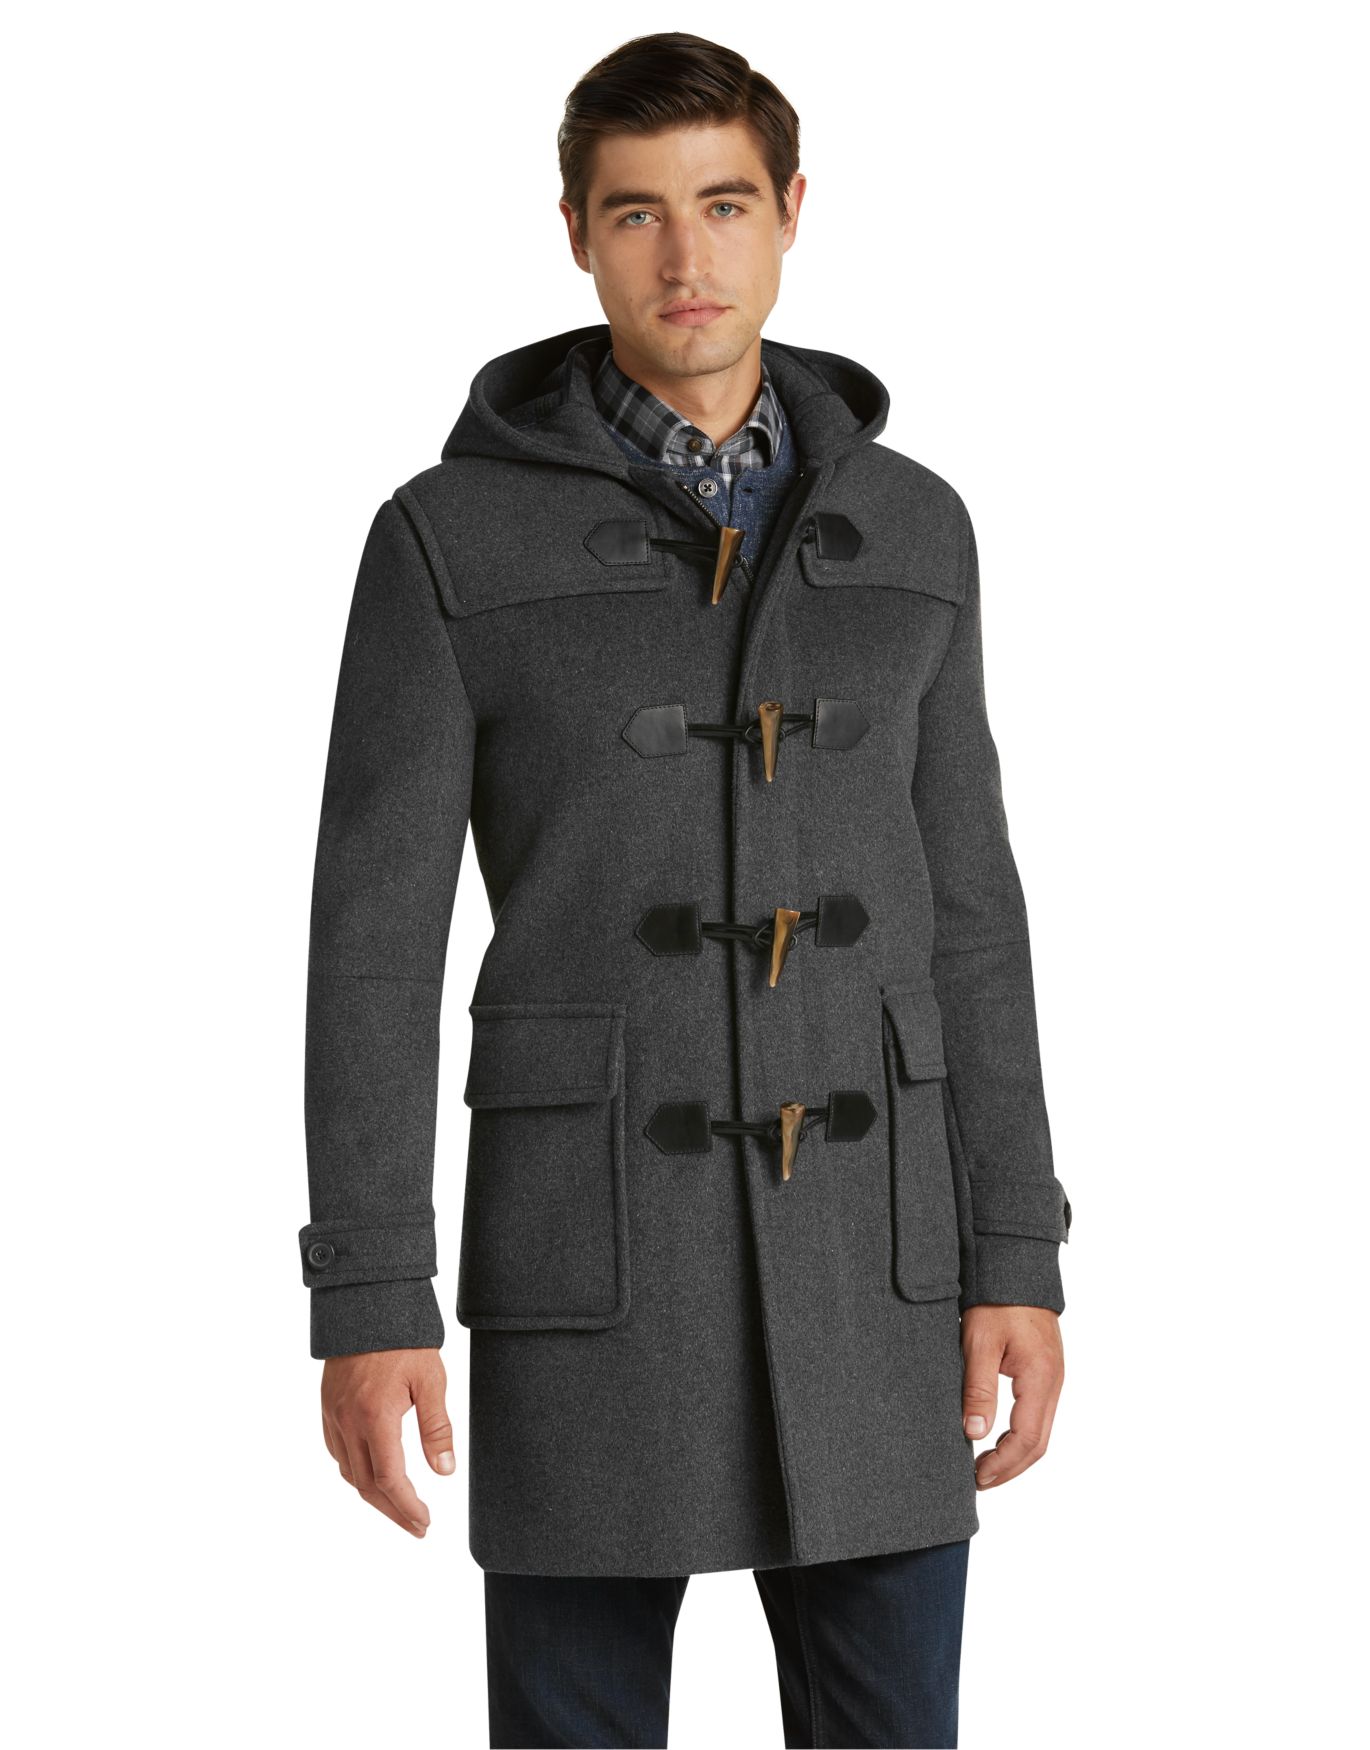 1905 Collection Tailored Fit 3/4 Length Duffle Coat CLEARANCE ...